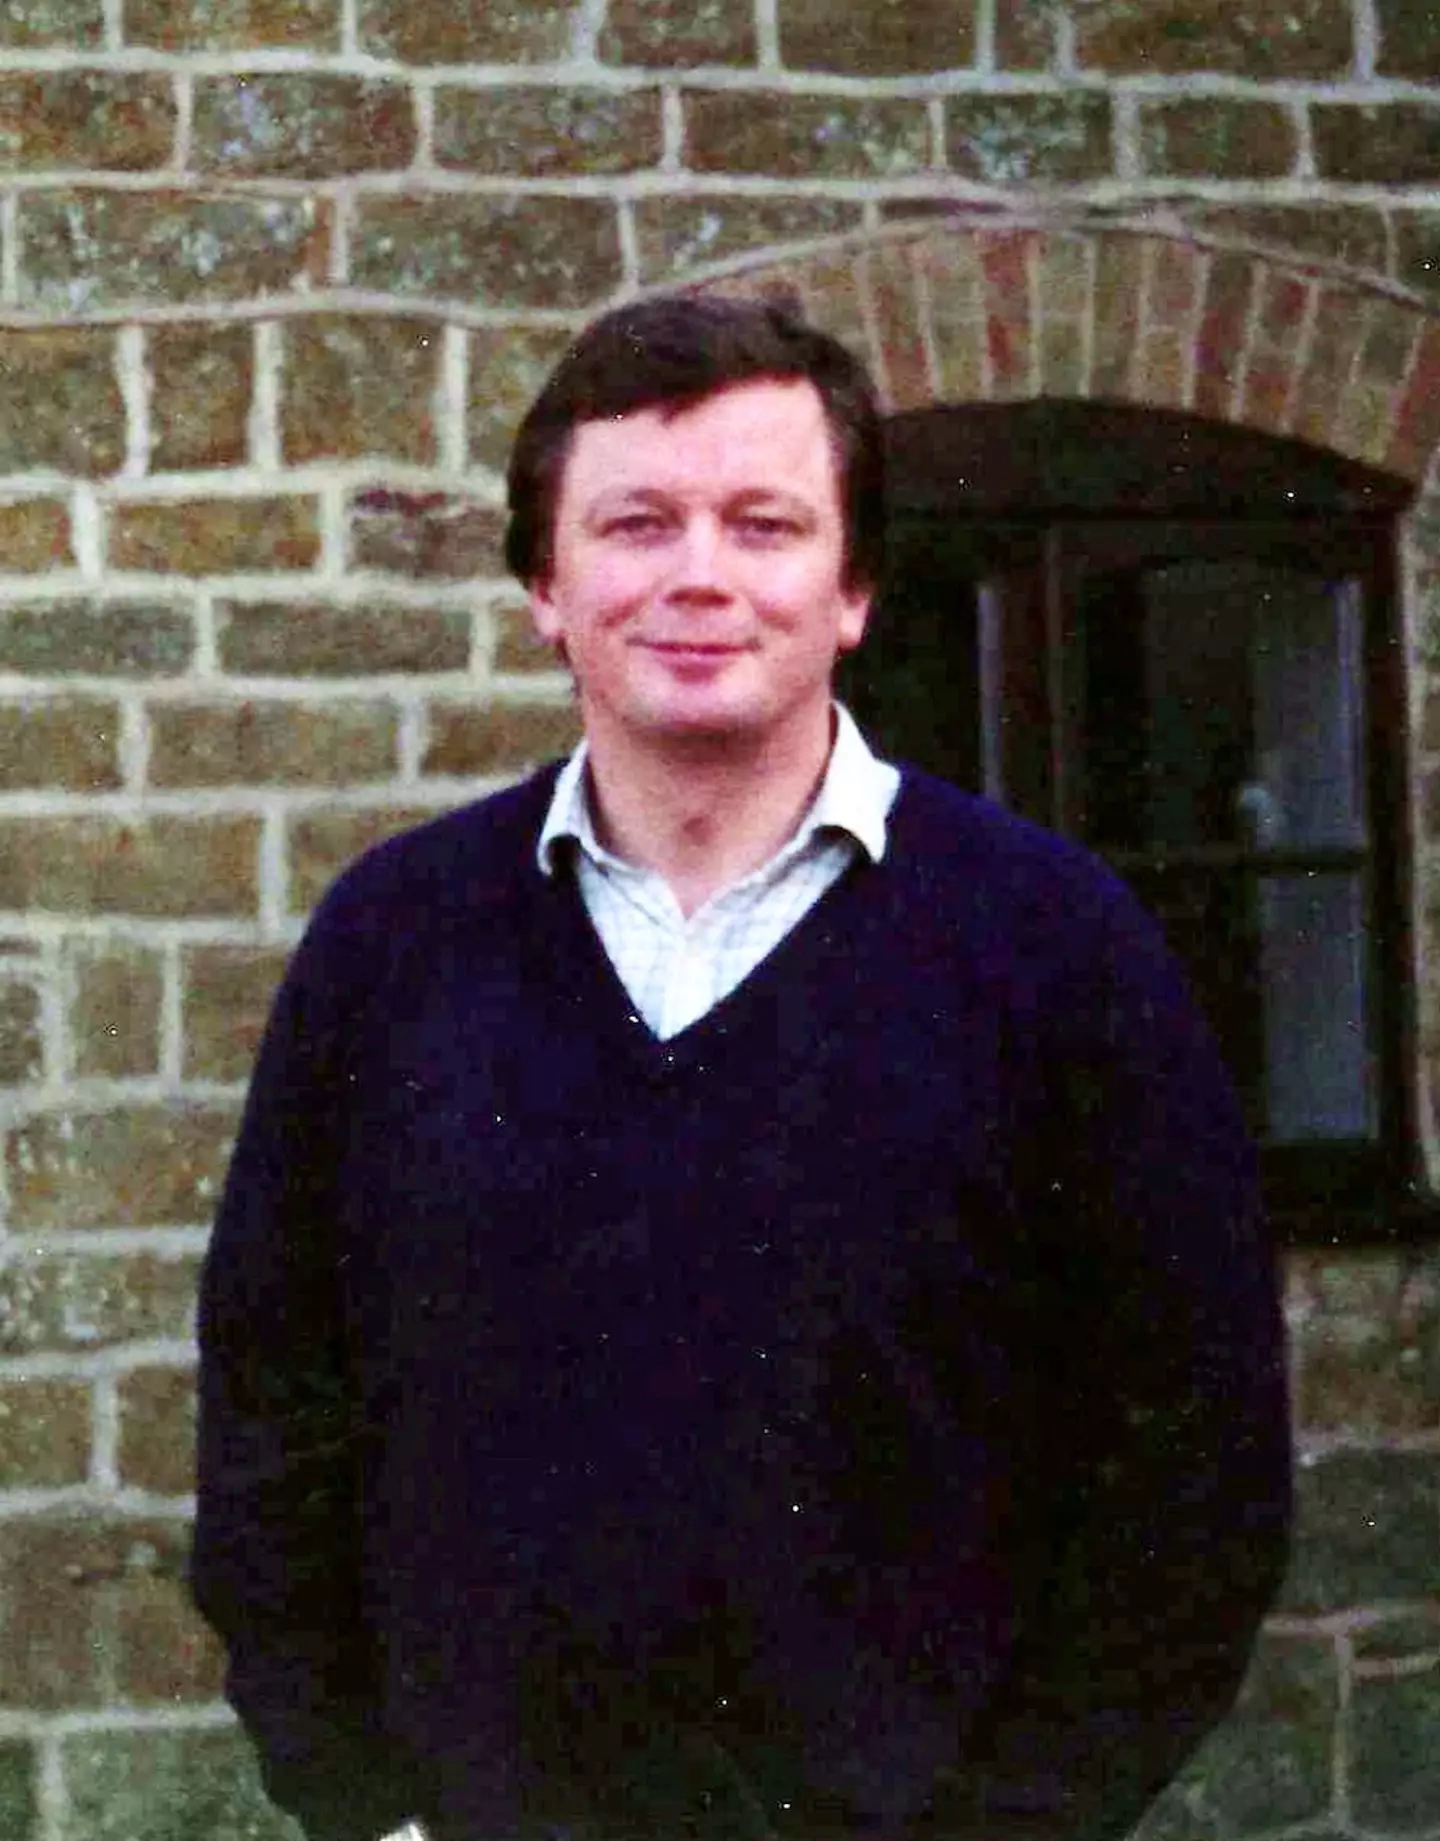 Geoff Monks pictured in 1997.